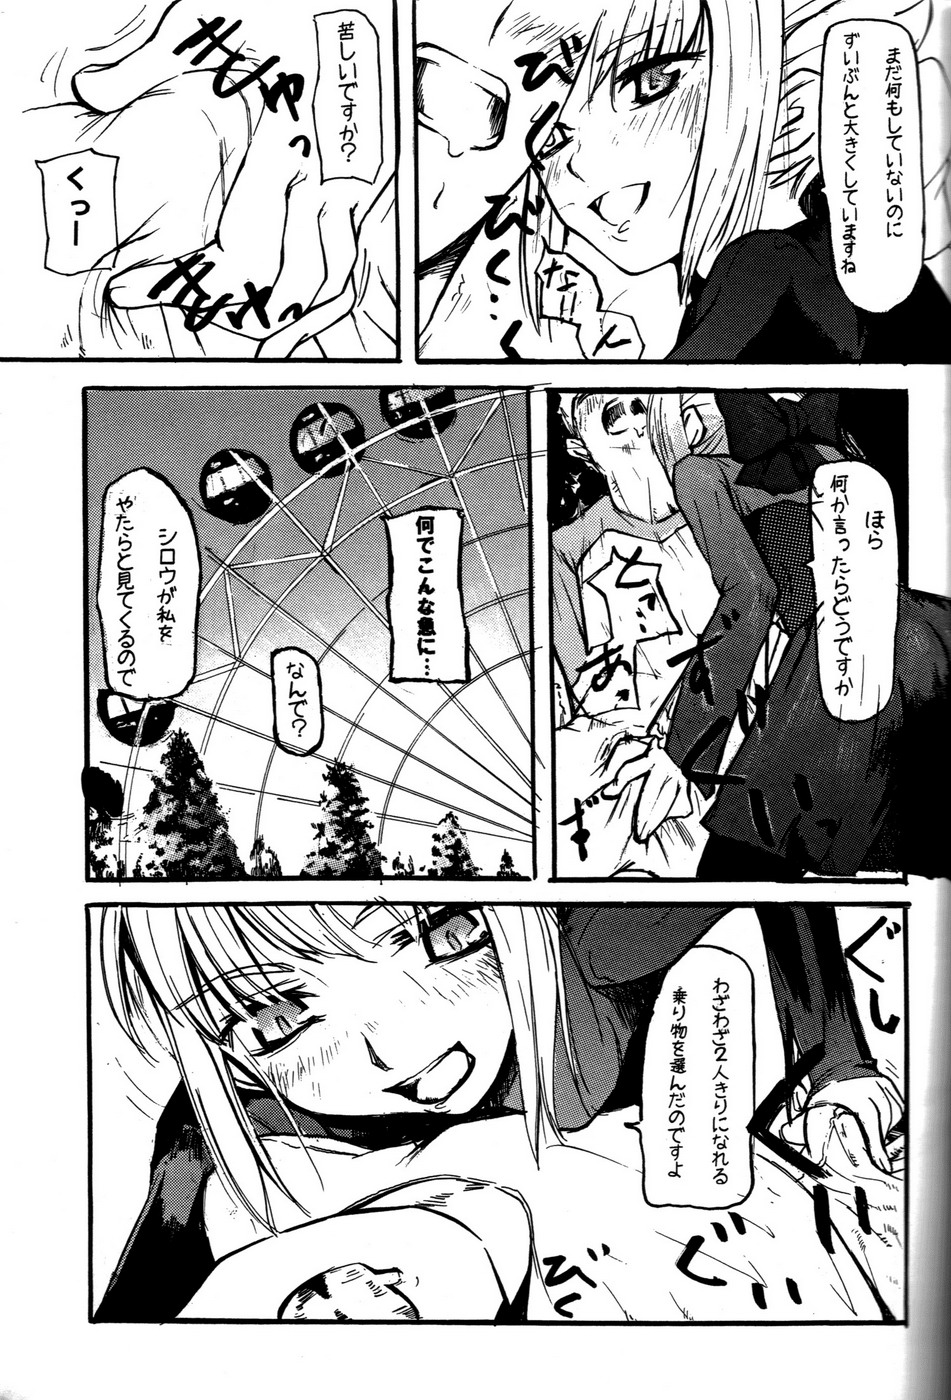 (C71) [DDT (Itachi)] OUVERTURE (Fate/hollow ataraxia) page 7 full